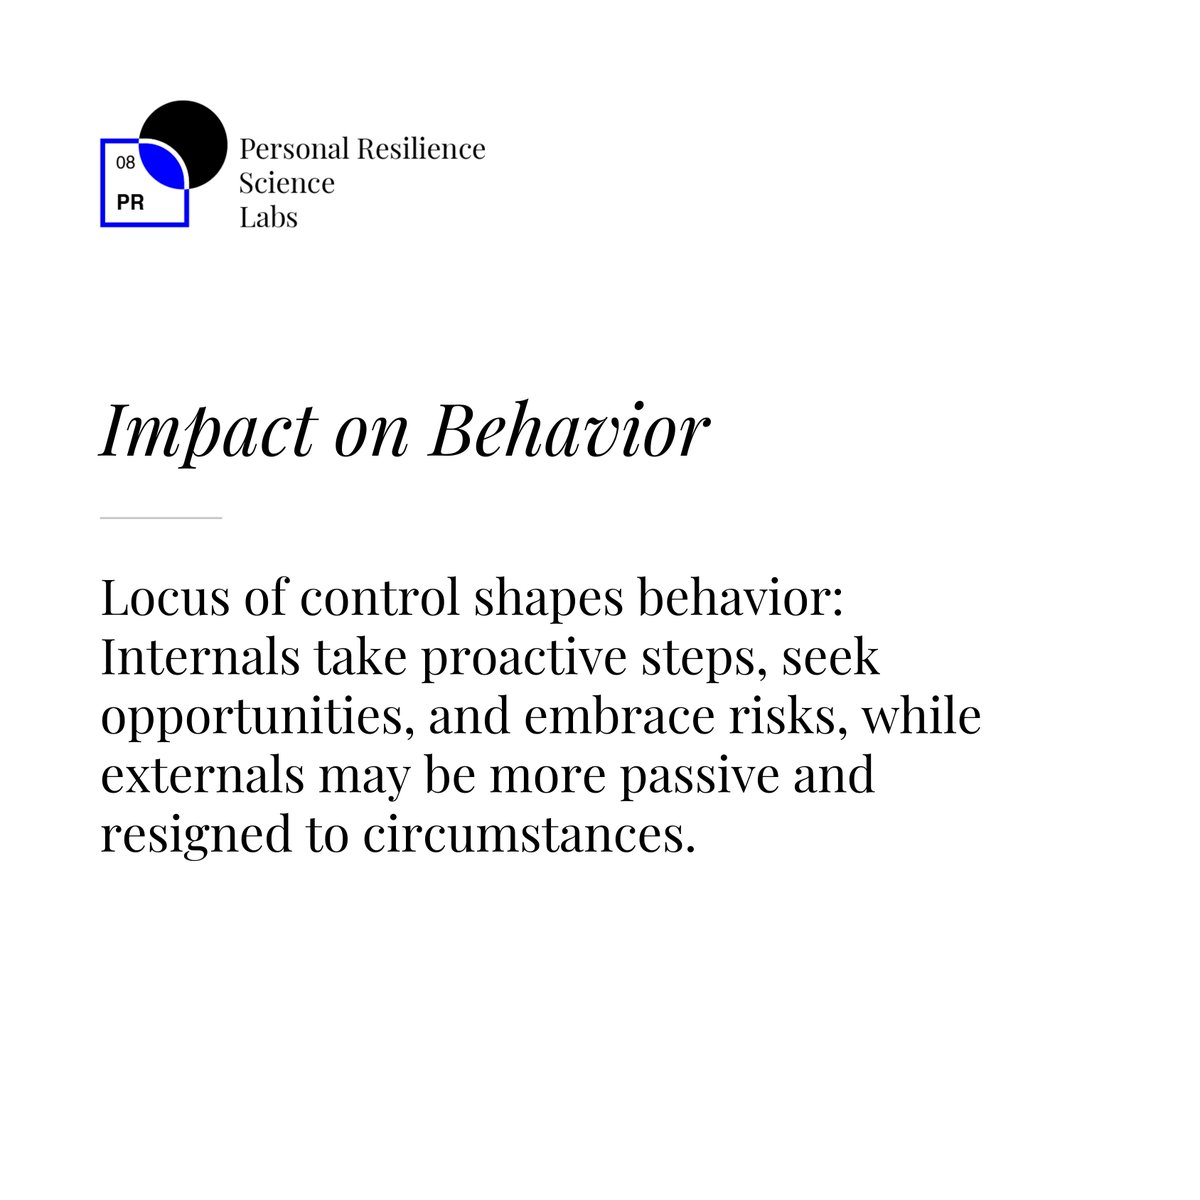 Did you know your locus of control influences your behavior? Internals take charge, seeking opportunities and embracing risks, while externals may feel resigned to circumstances.
#LMSL #LifeManagementScienceLabs #PersonalResilienceScienceLabs #Resilience #Facts  #LocusOfControl